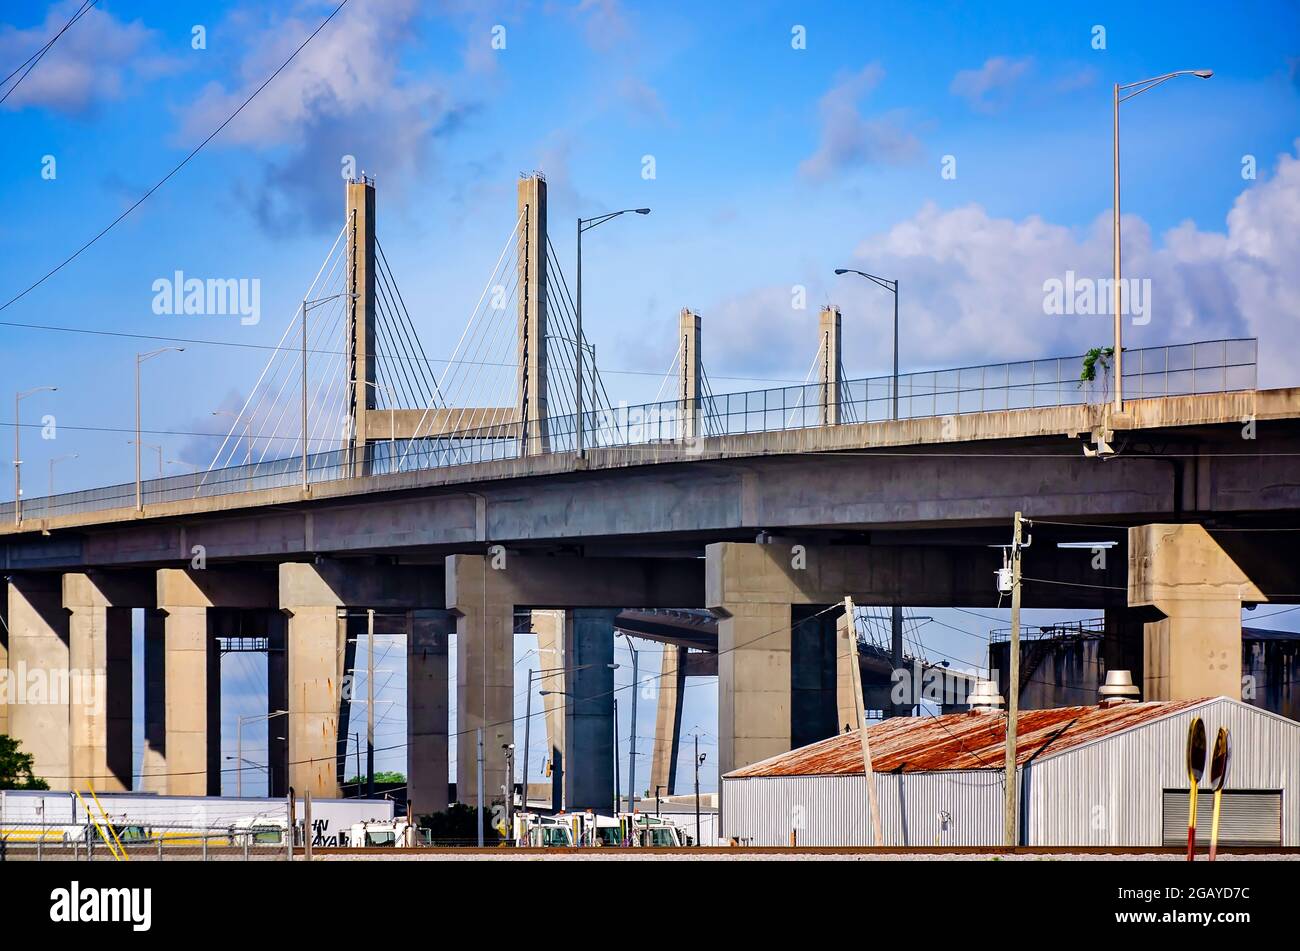 The Cochrane-Africatown USA Bridge, often called the Africatown Bridge, is pictured, June 26, 2021, in Mobile, Alabama. Stock Photo